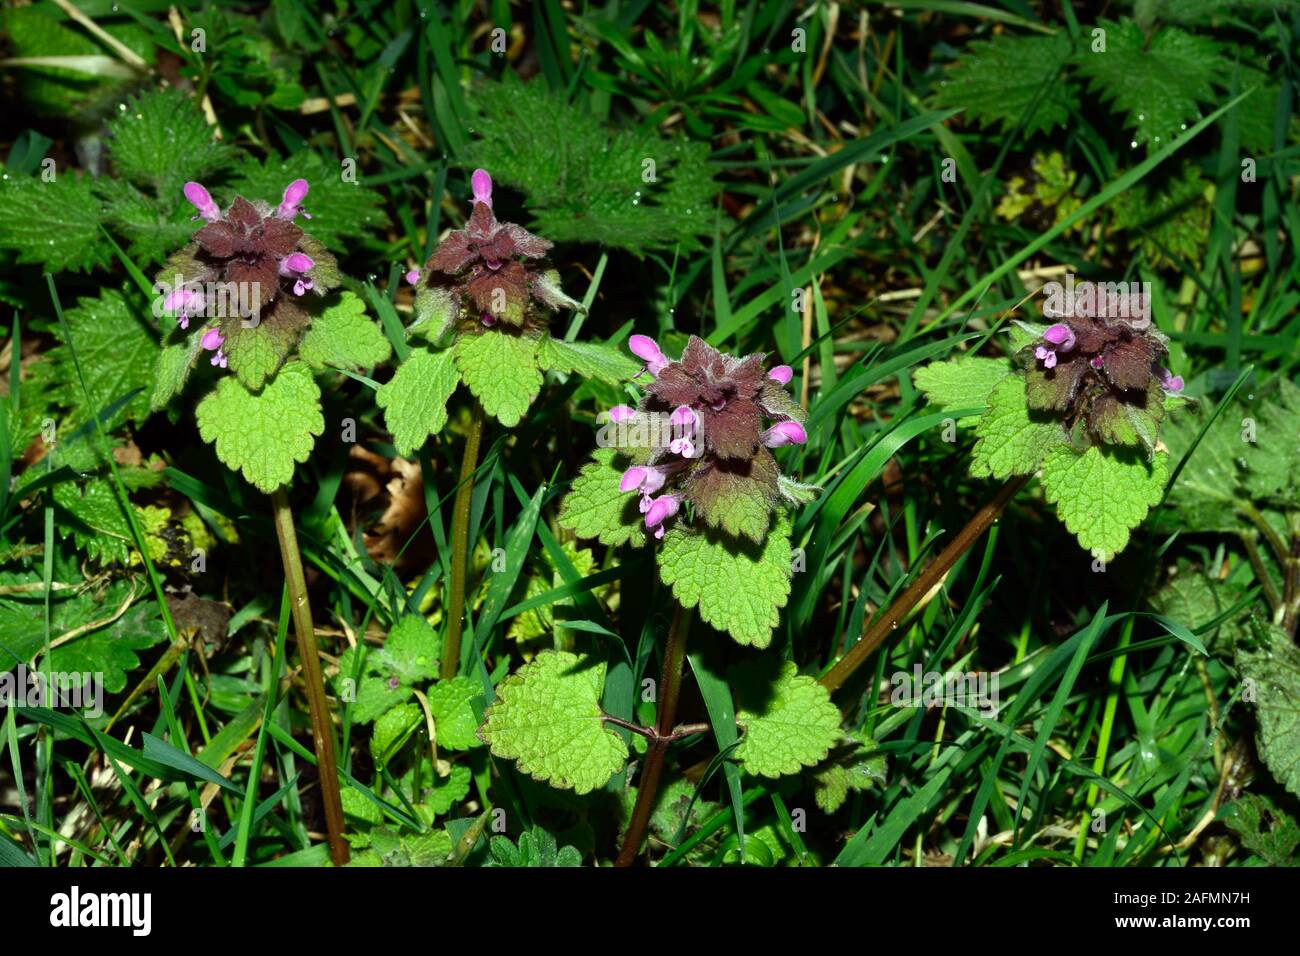 Lamium purpureum (red dead-nettle) is native to Europe and Asia growing in meadows, forest edges, roadsides and gardens. Stock Photo